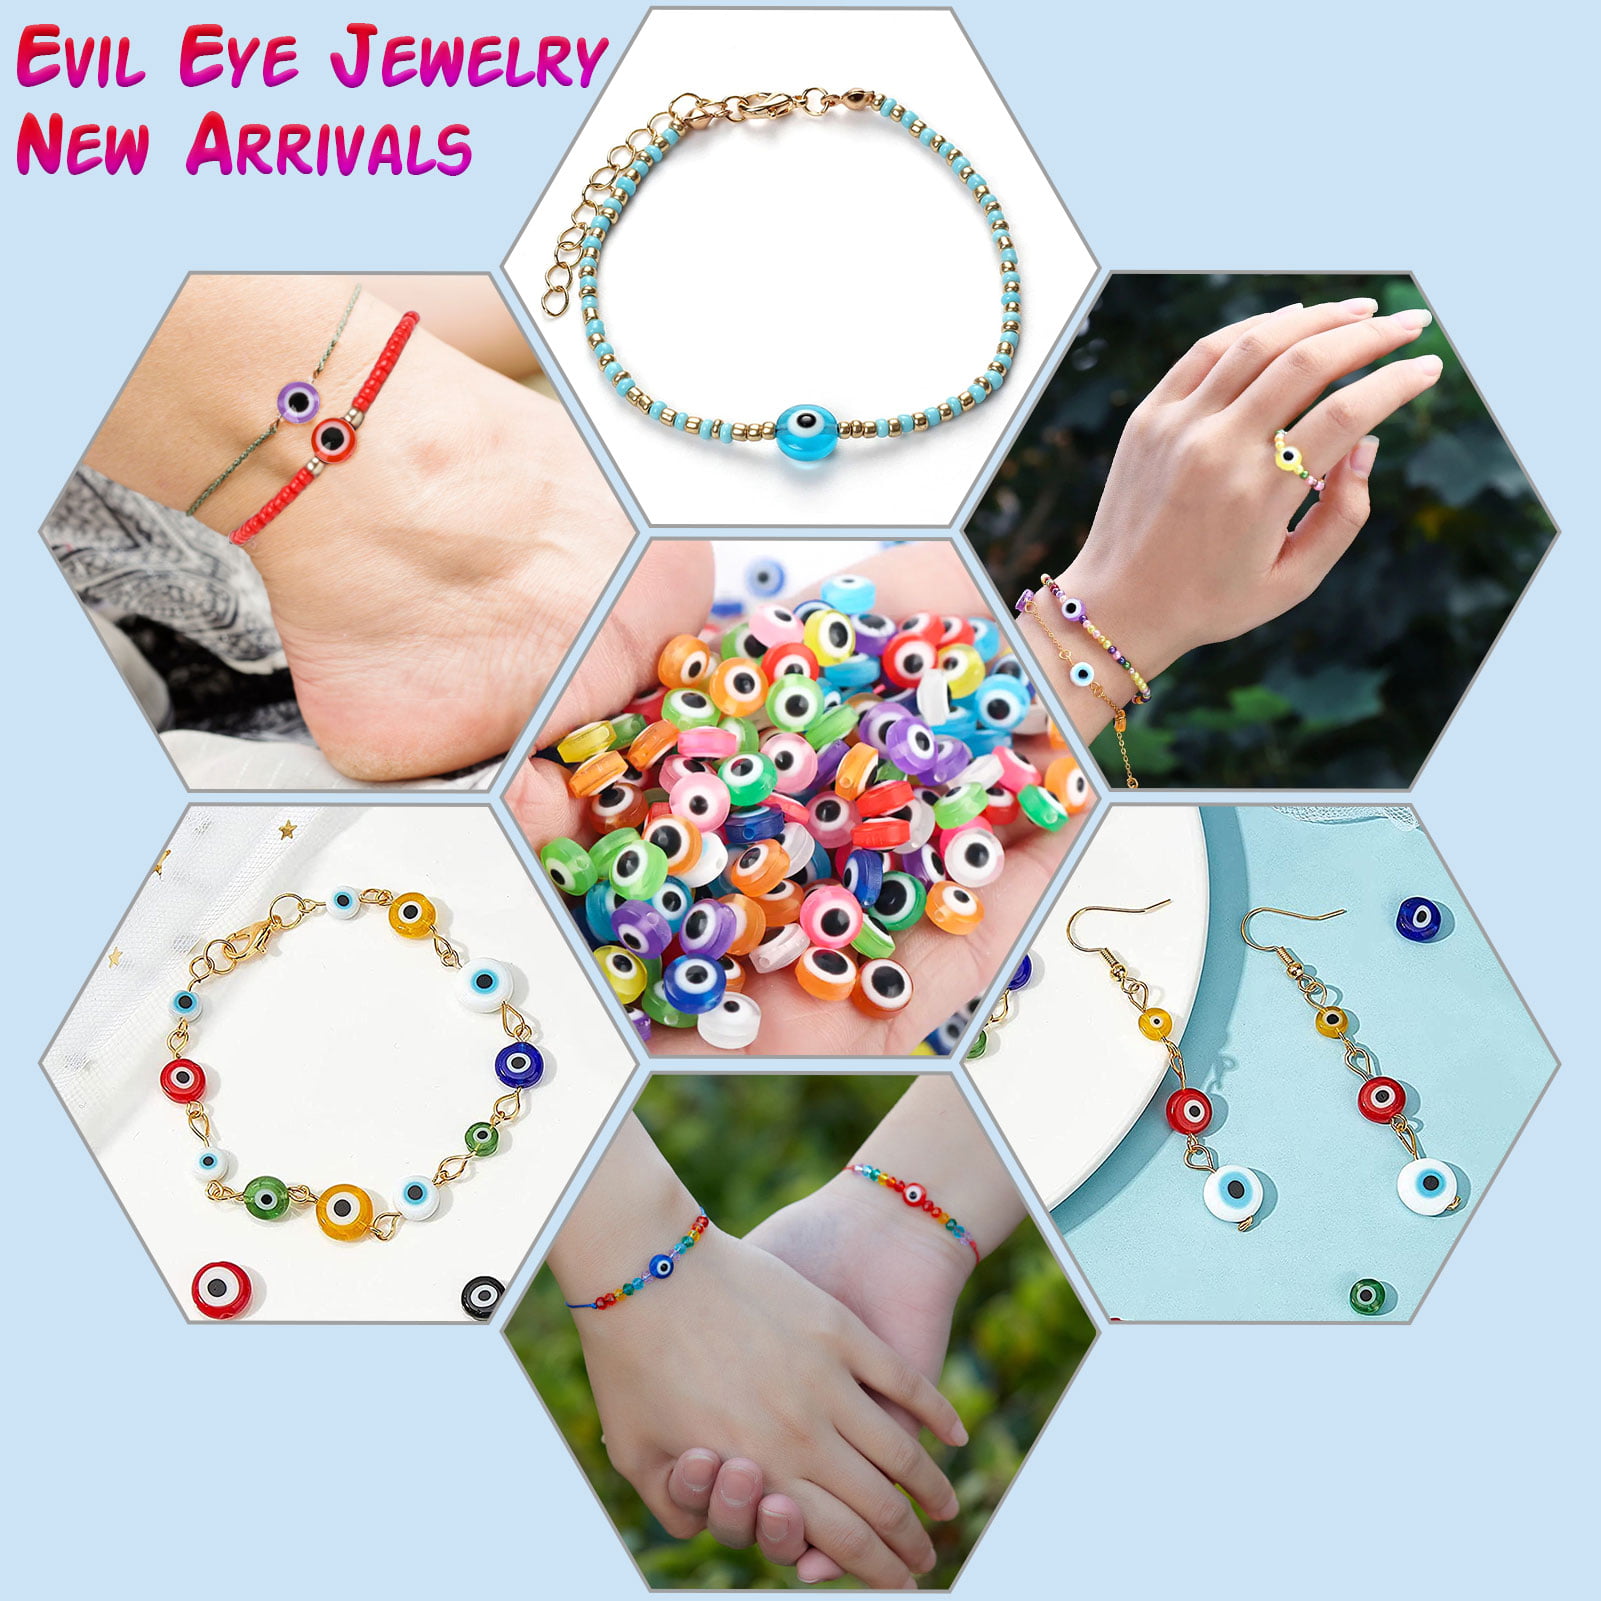 Funtopia Evil Eye Beads for Jewelry Making, Evil Eye Bracelets Making Kit  with Colorful Crystal Bicone Beads Faceted Acrylic Beads, Art Craft Kit for